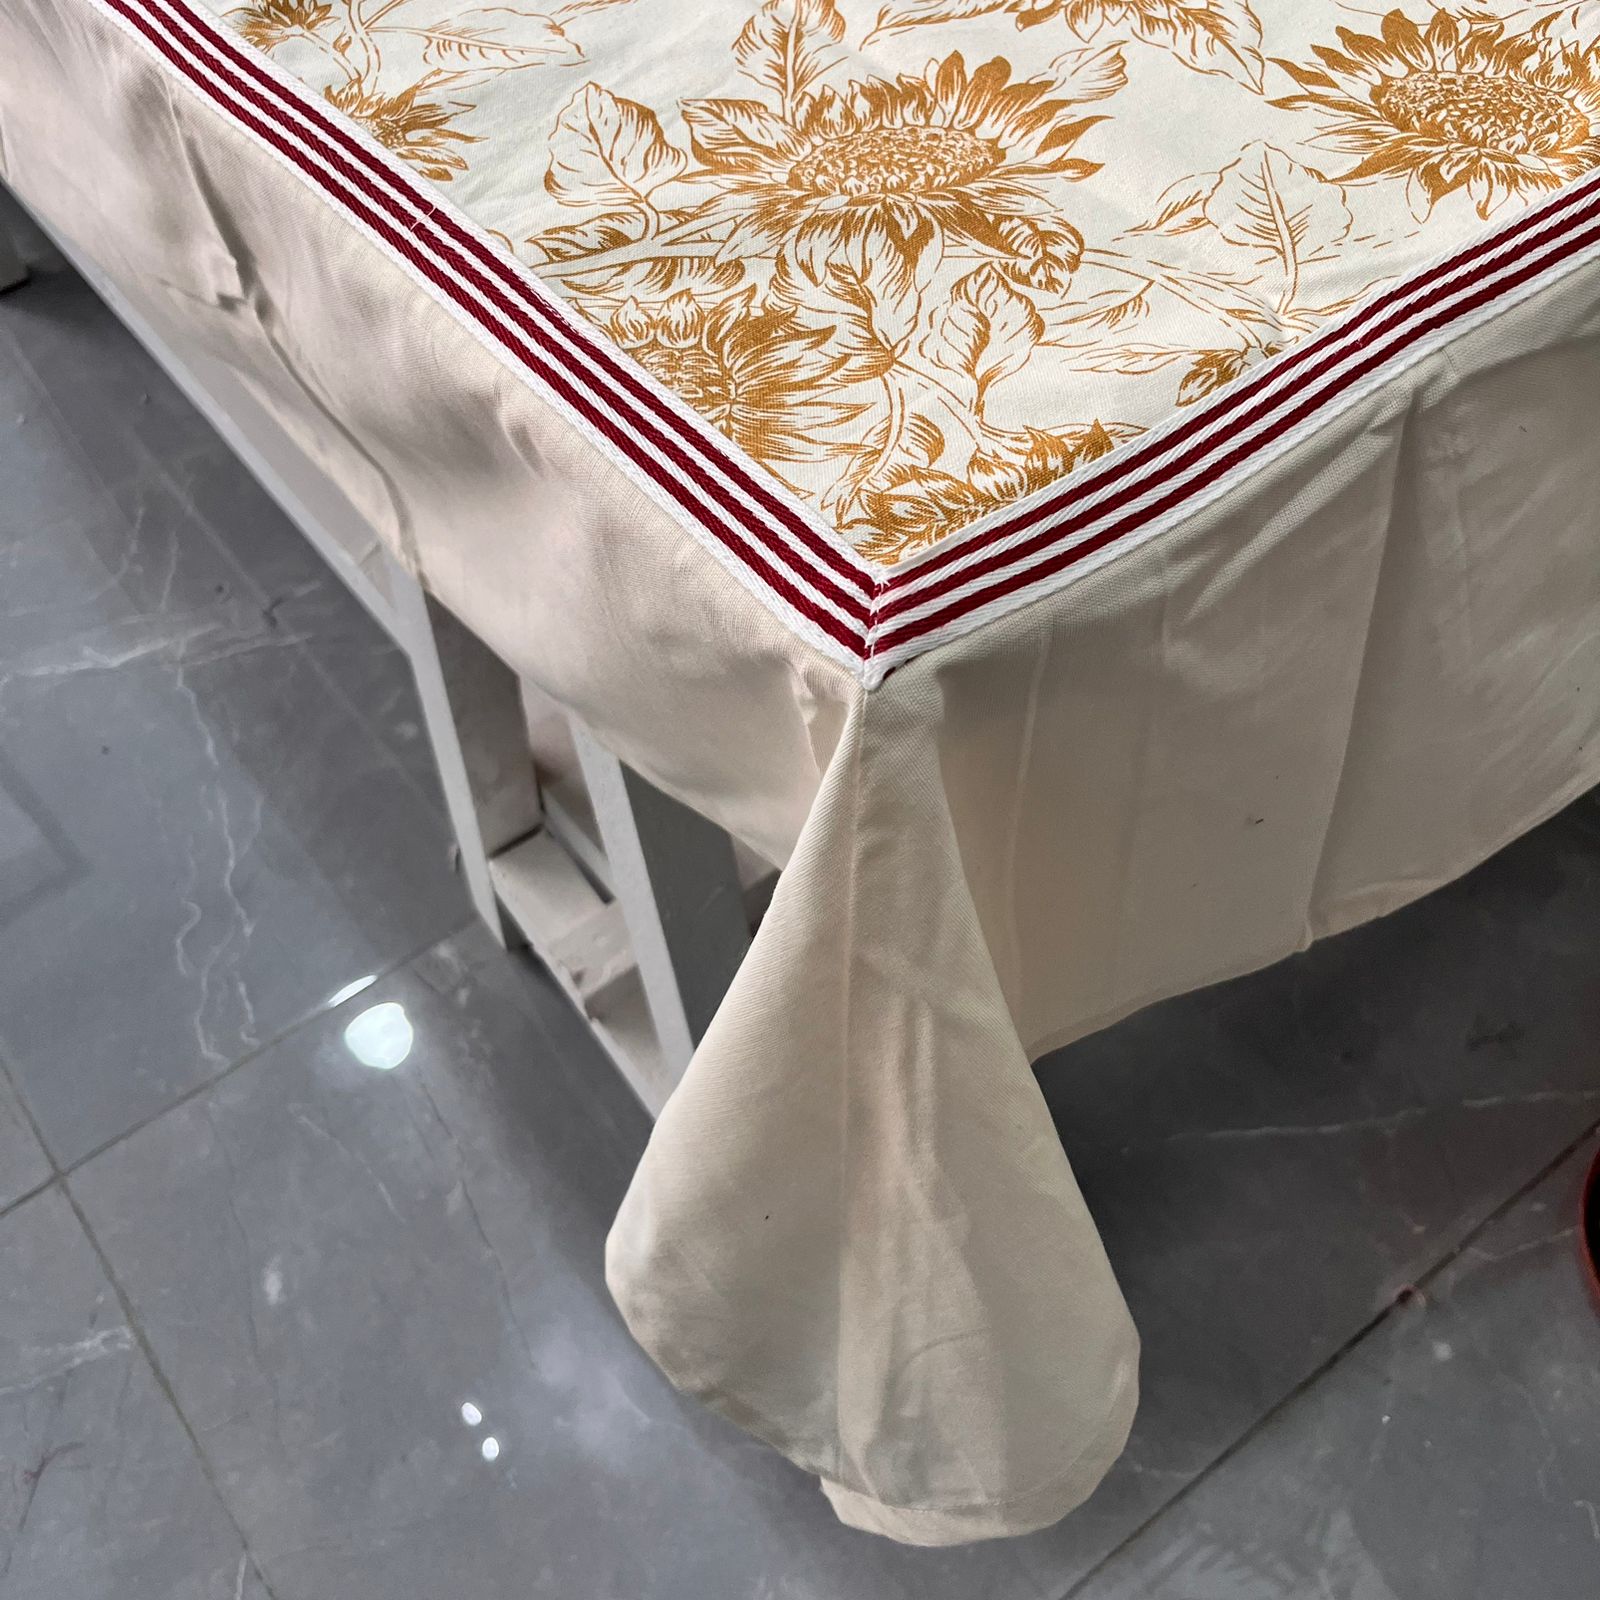 Dining Sheet with size of 152cm x 228cm (60" x 90")